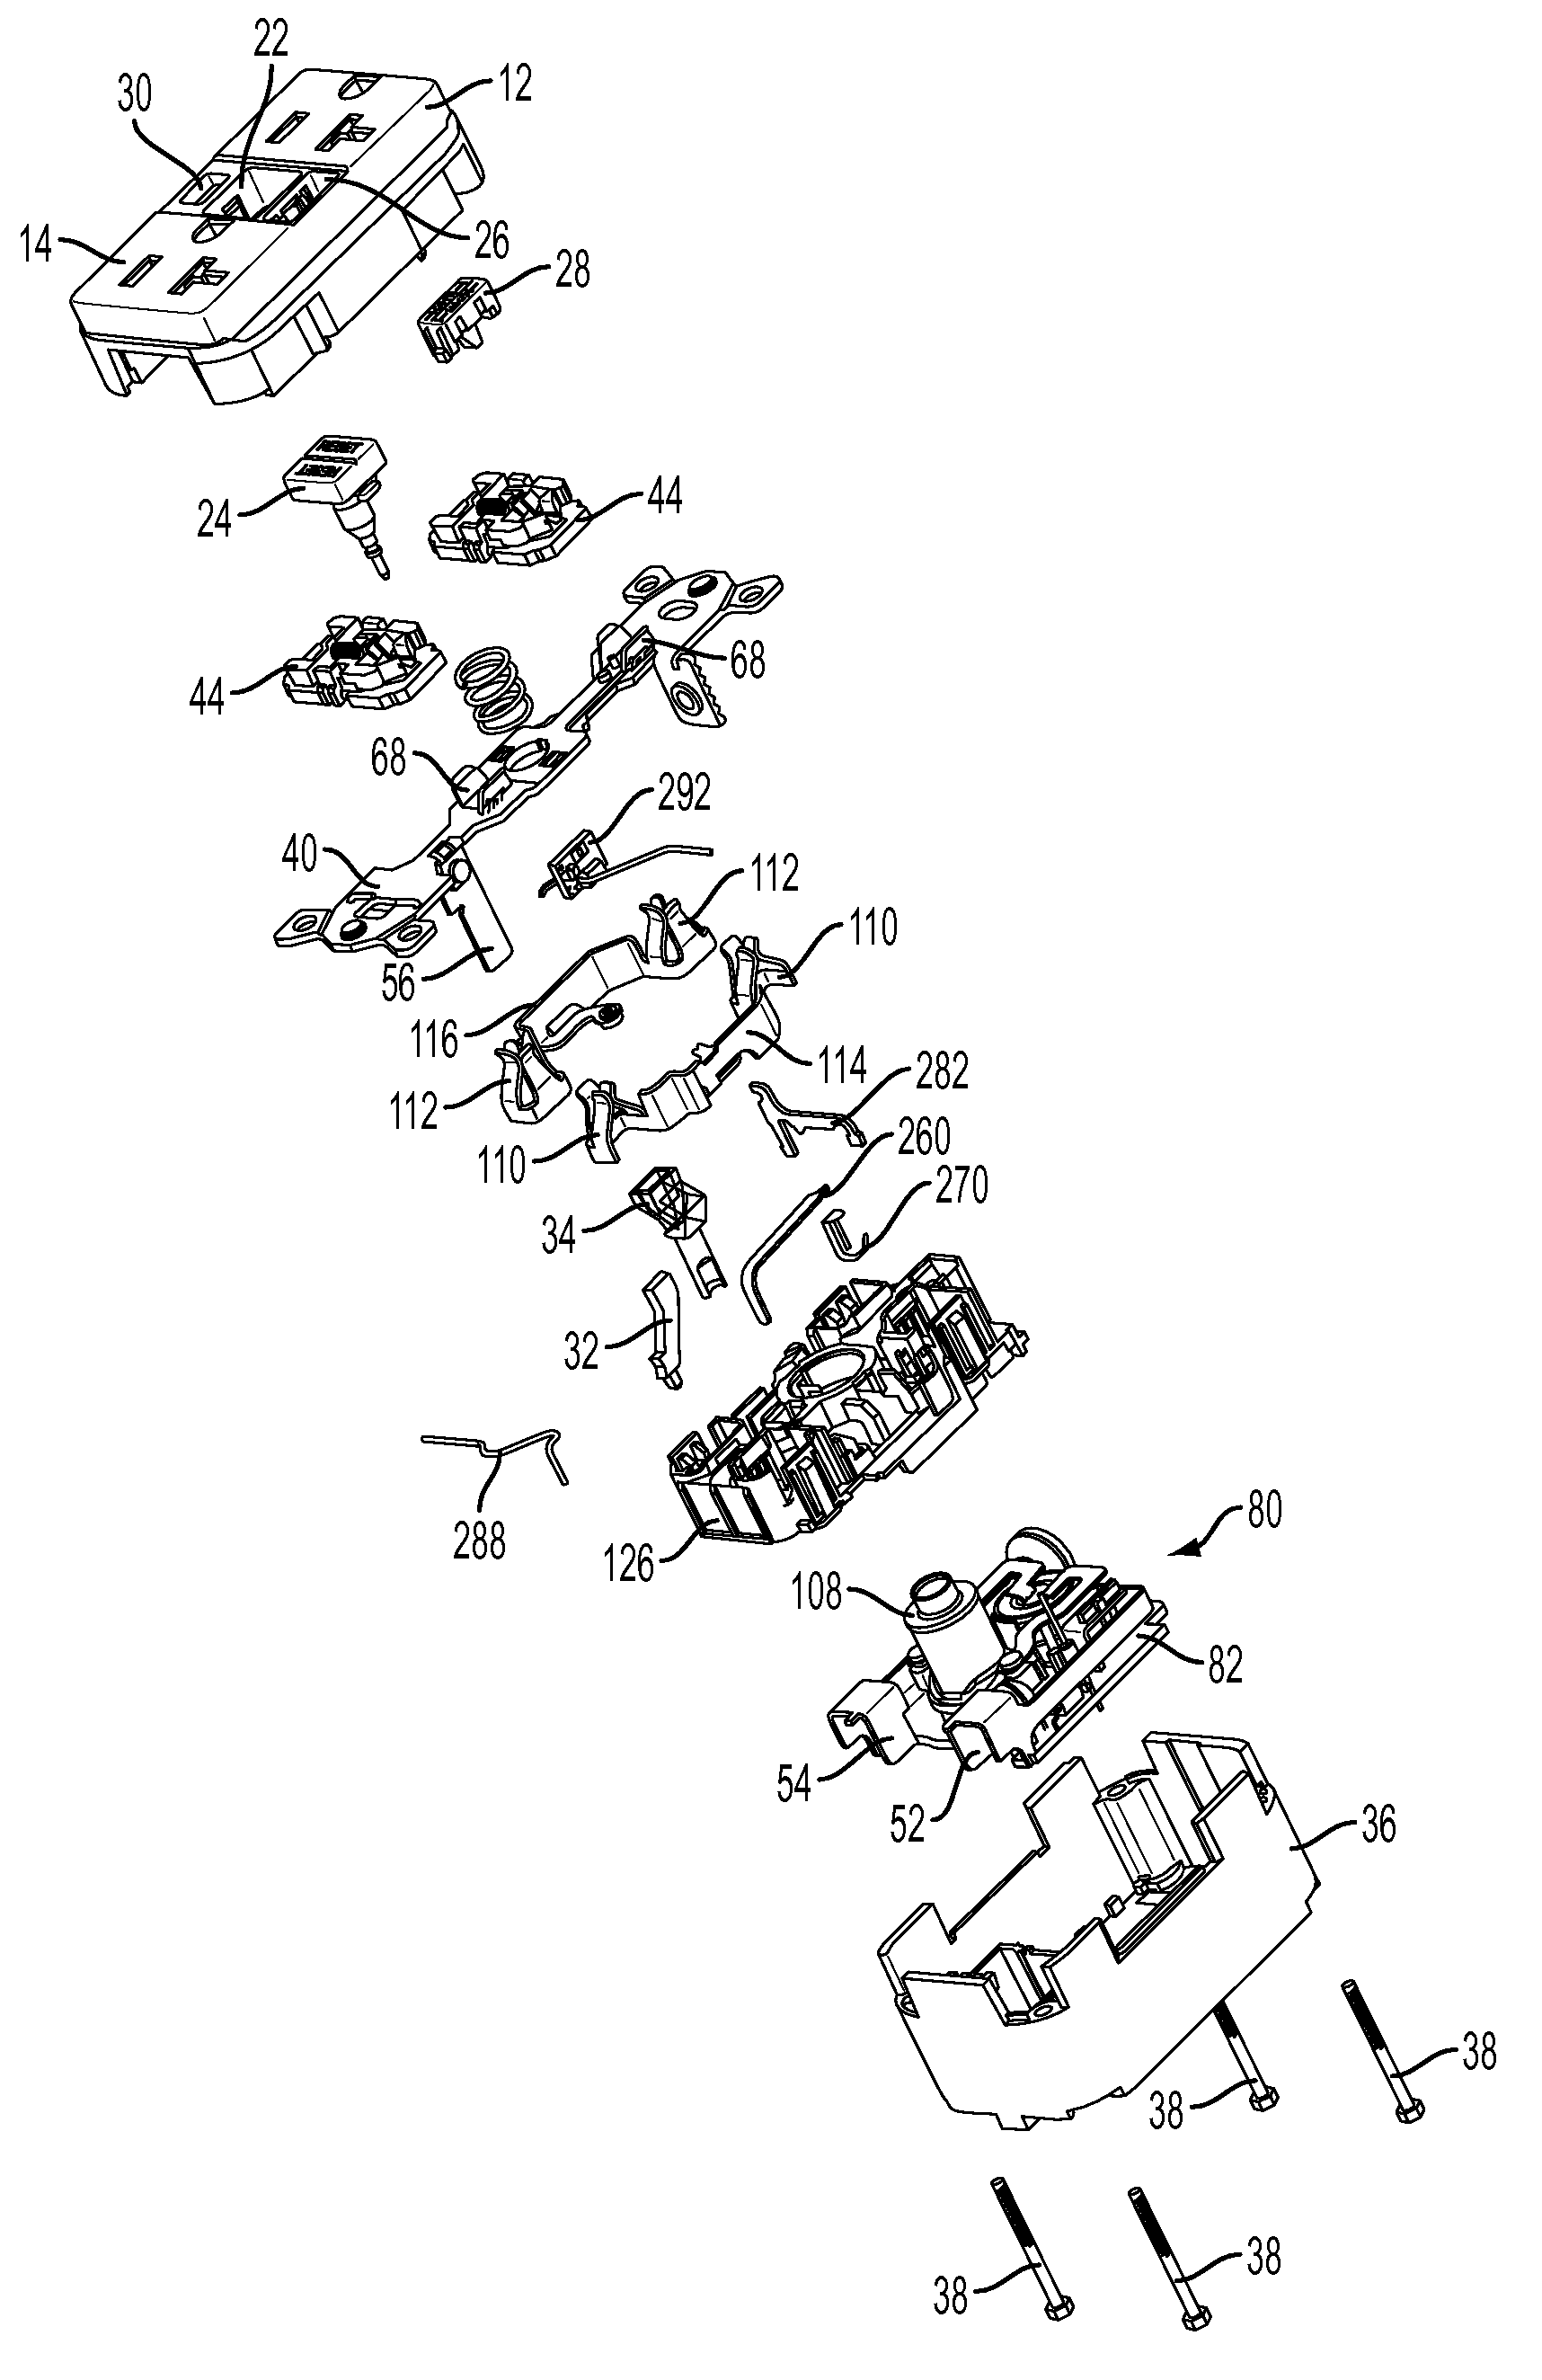 Enhanced Auto-Monitoring Circuit and Method for an Electrical Device